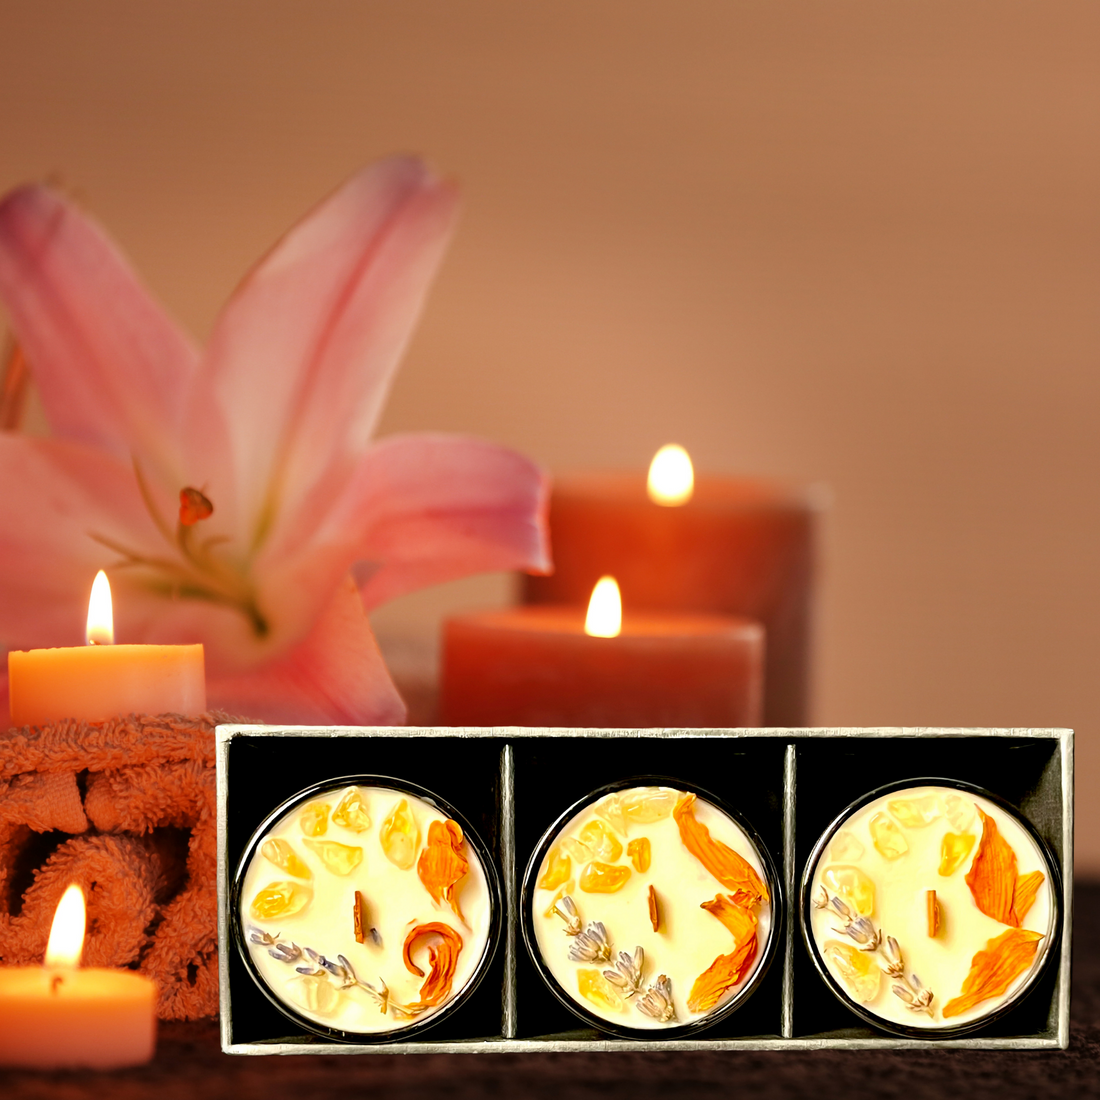 Happiness - Sample Candle